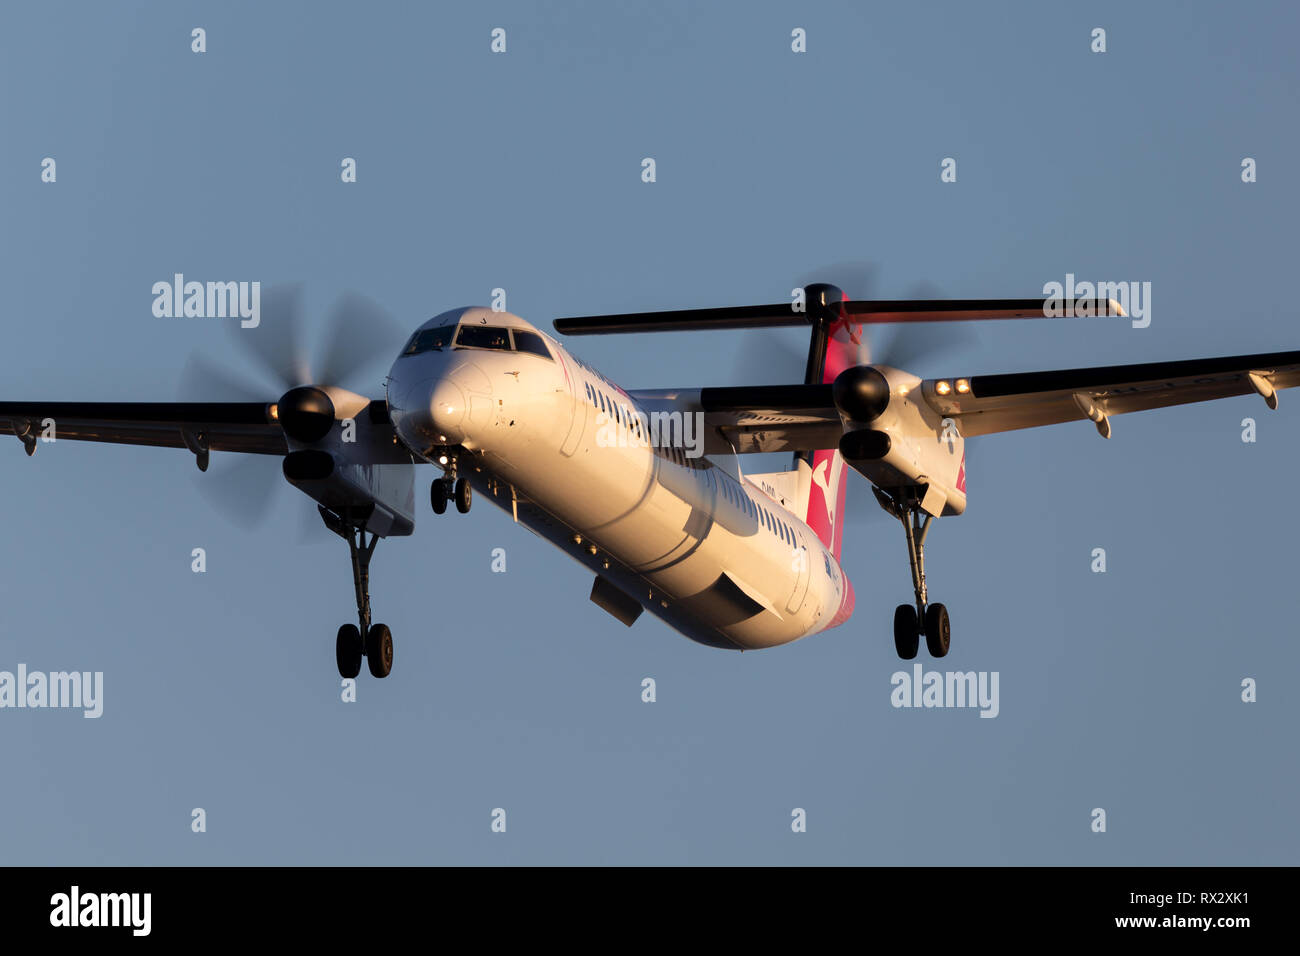 QantasLink (Sunstate airlines) Bombardier DHC-8-402 twin engine turboprop regional airliner on approach to land at Adelaide Airport. Stock Photo